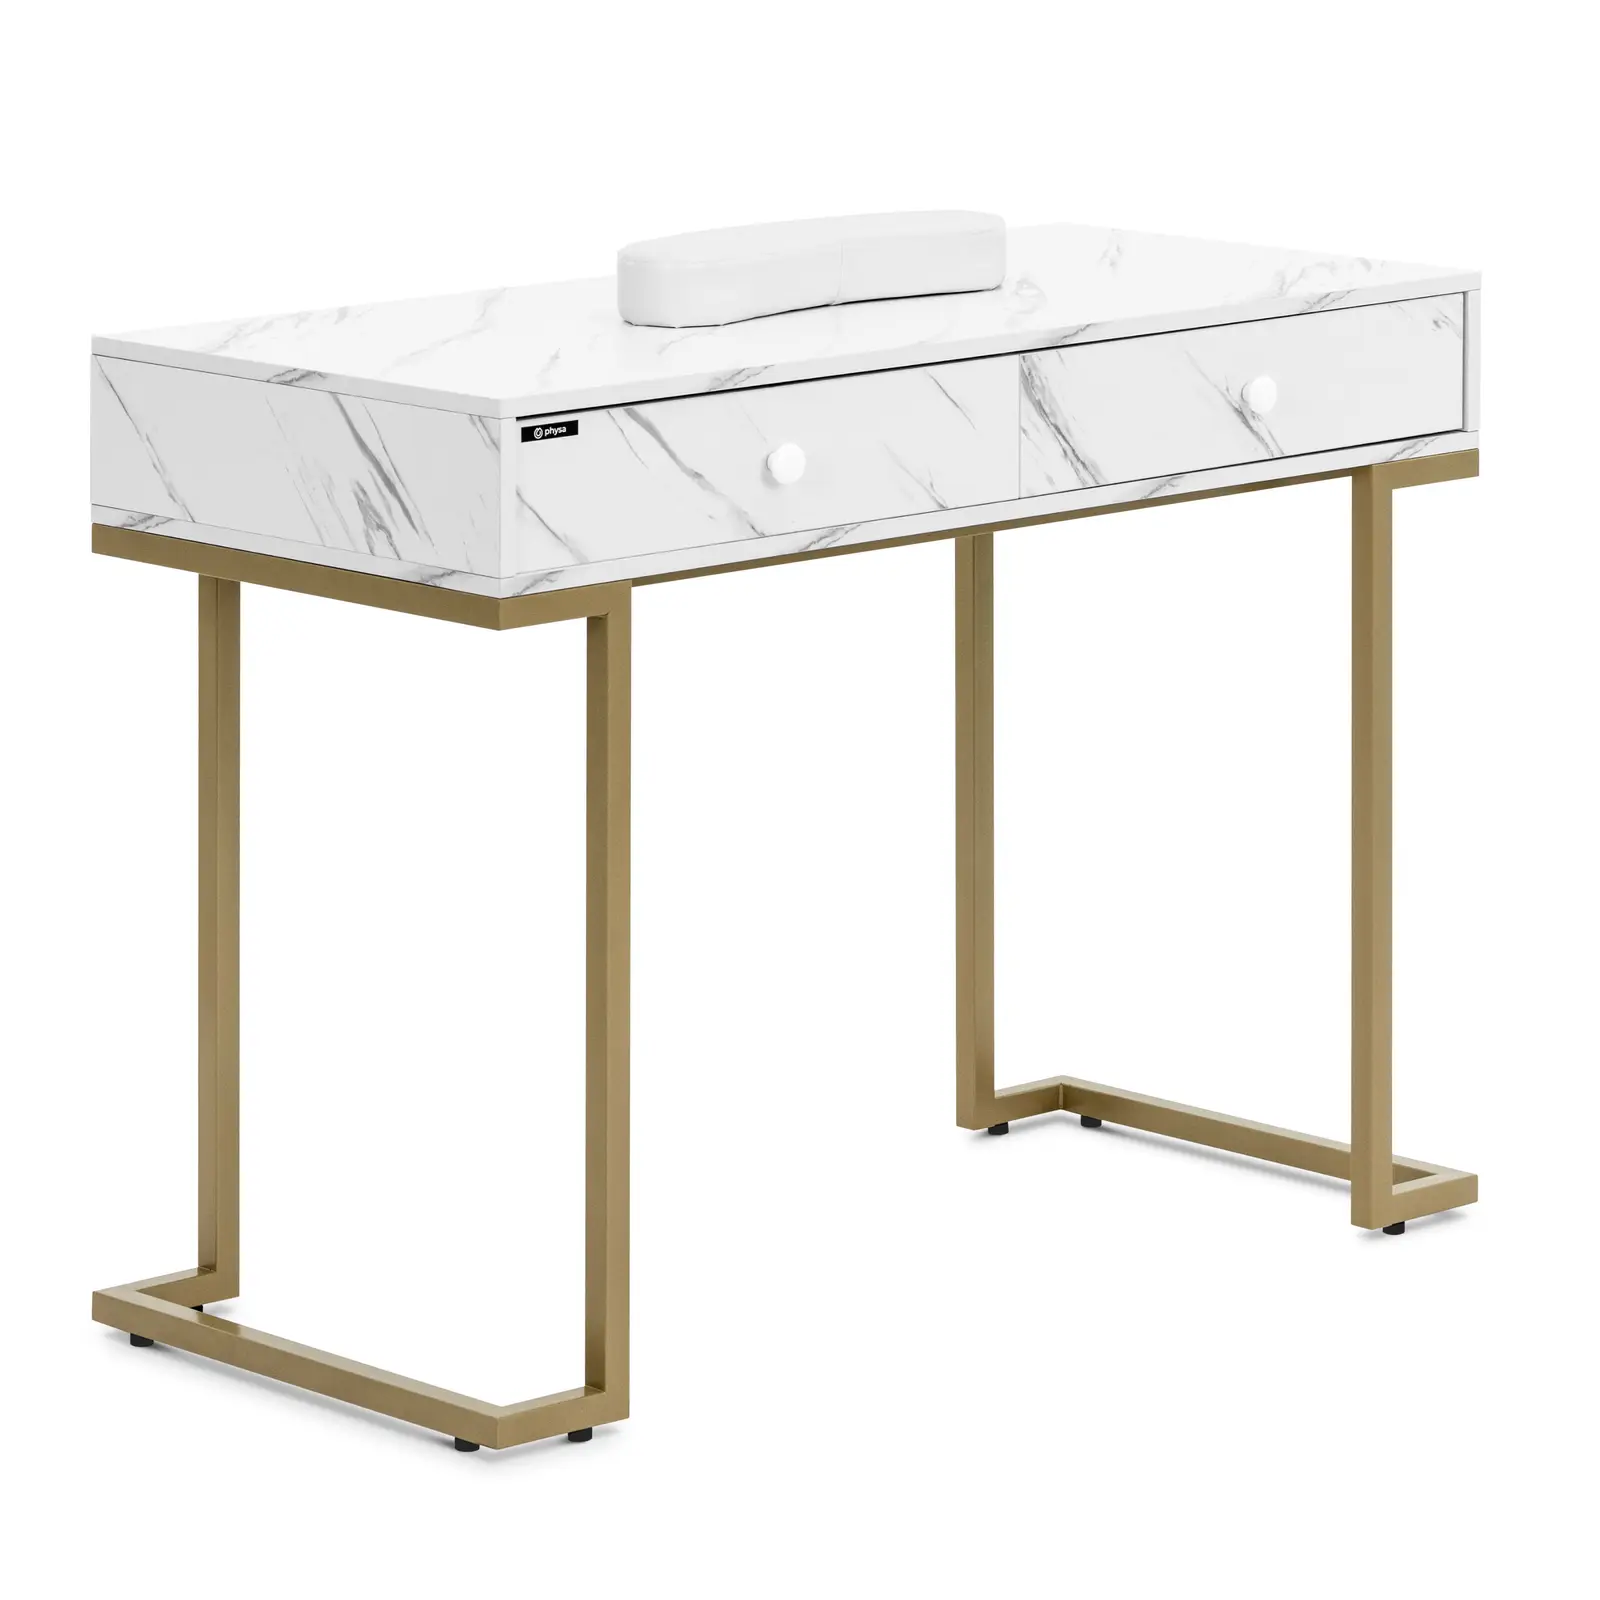 Nail Table - iron frame - marbled / golden - 2 drawers - hand rest